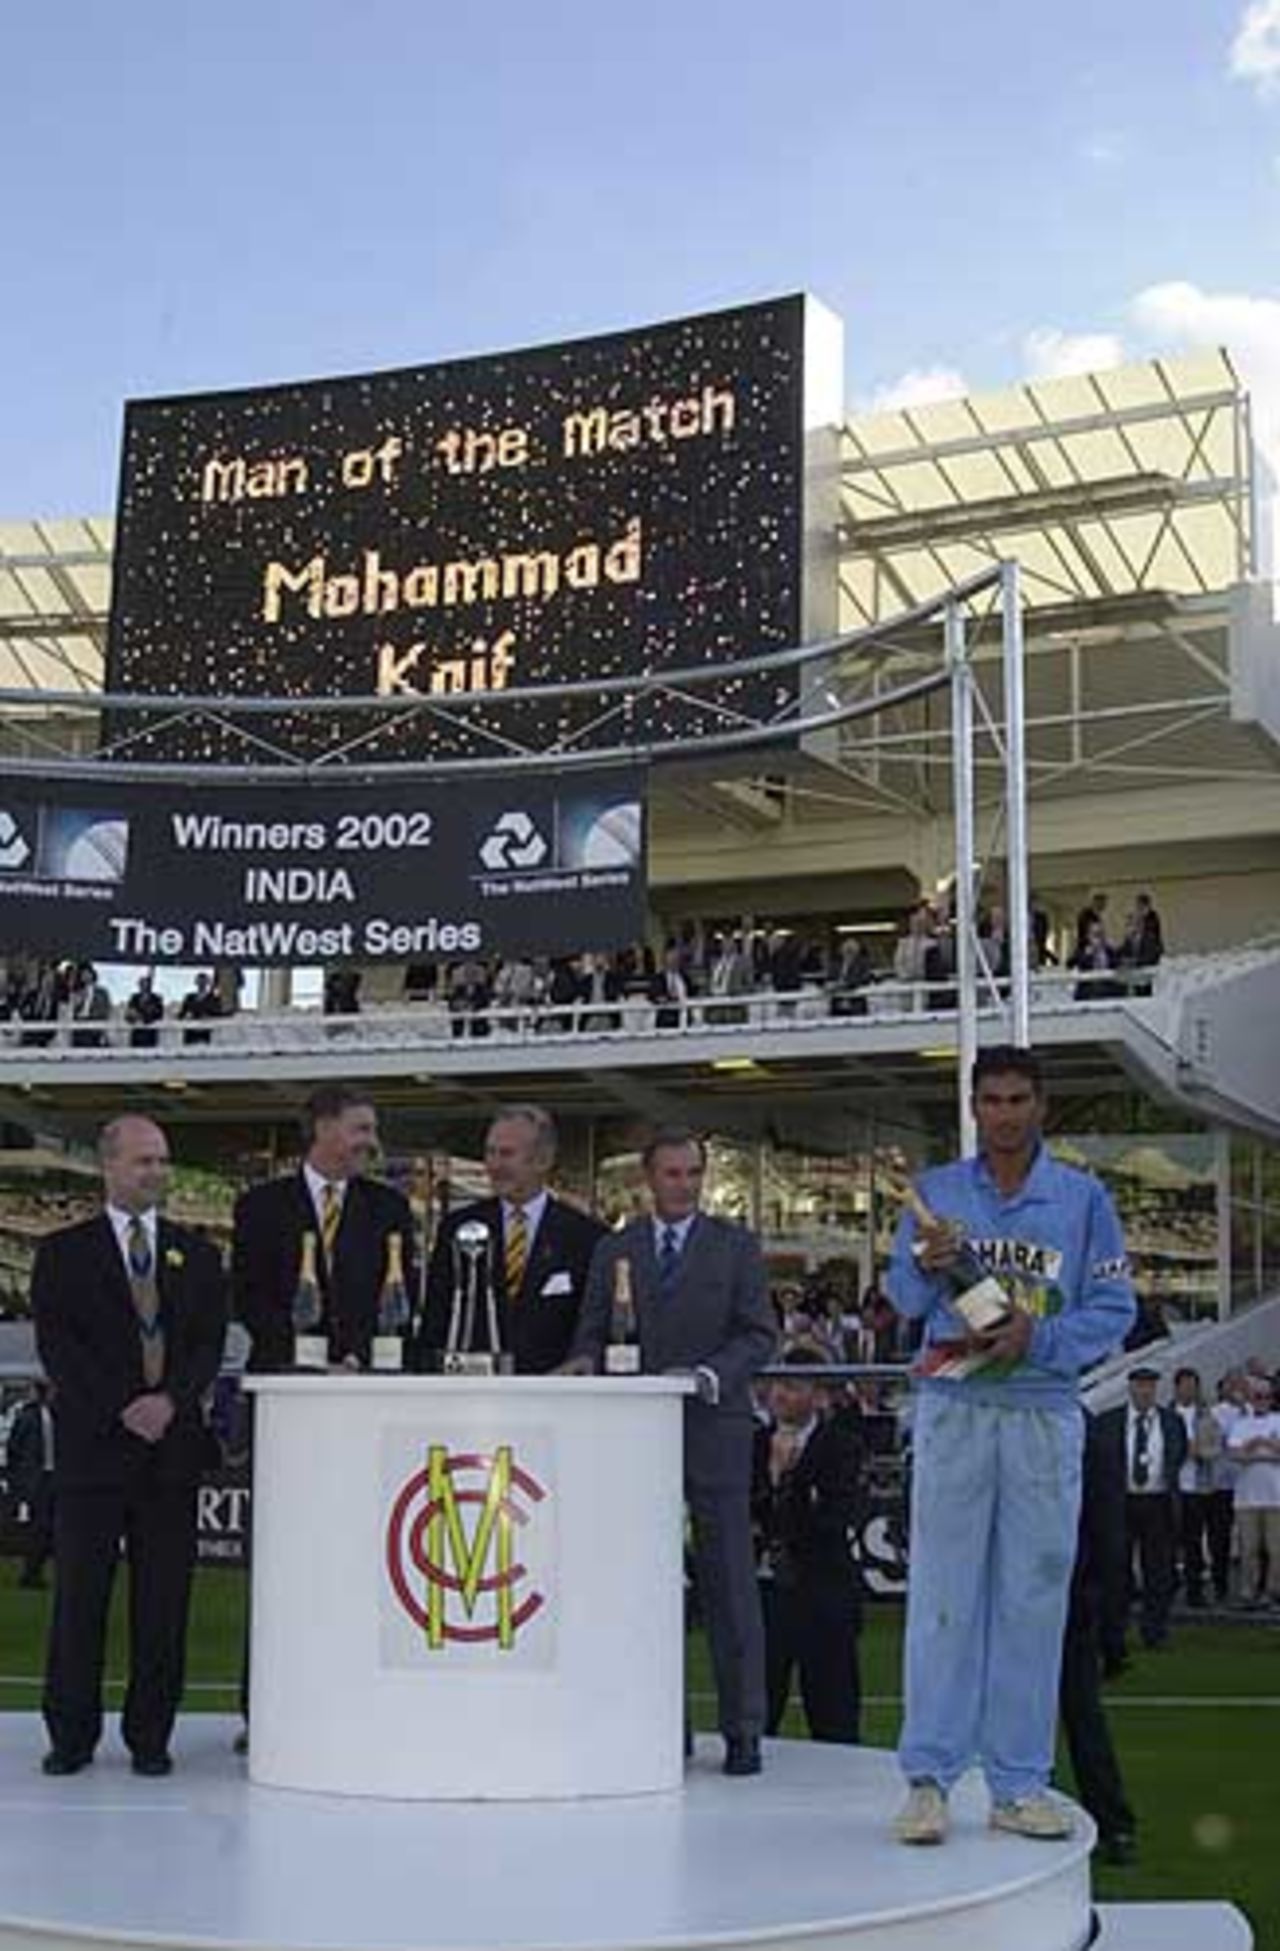 Mohammad Kaif is Man of the Match, NatWest Series Final at Lord's, 13th Jul 2002